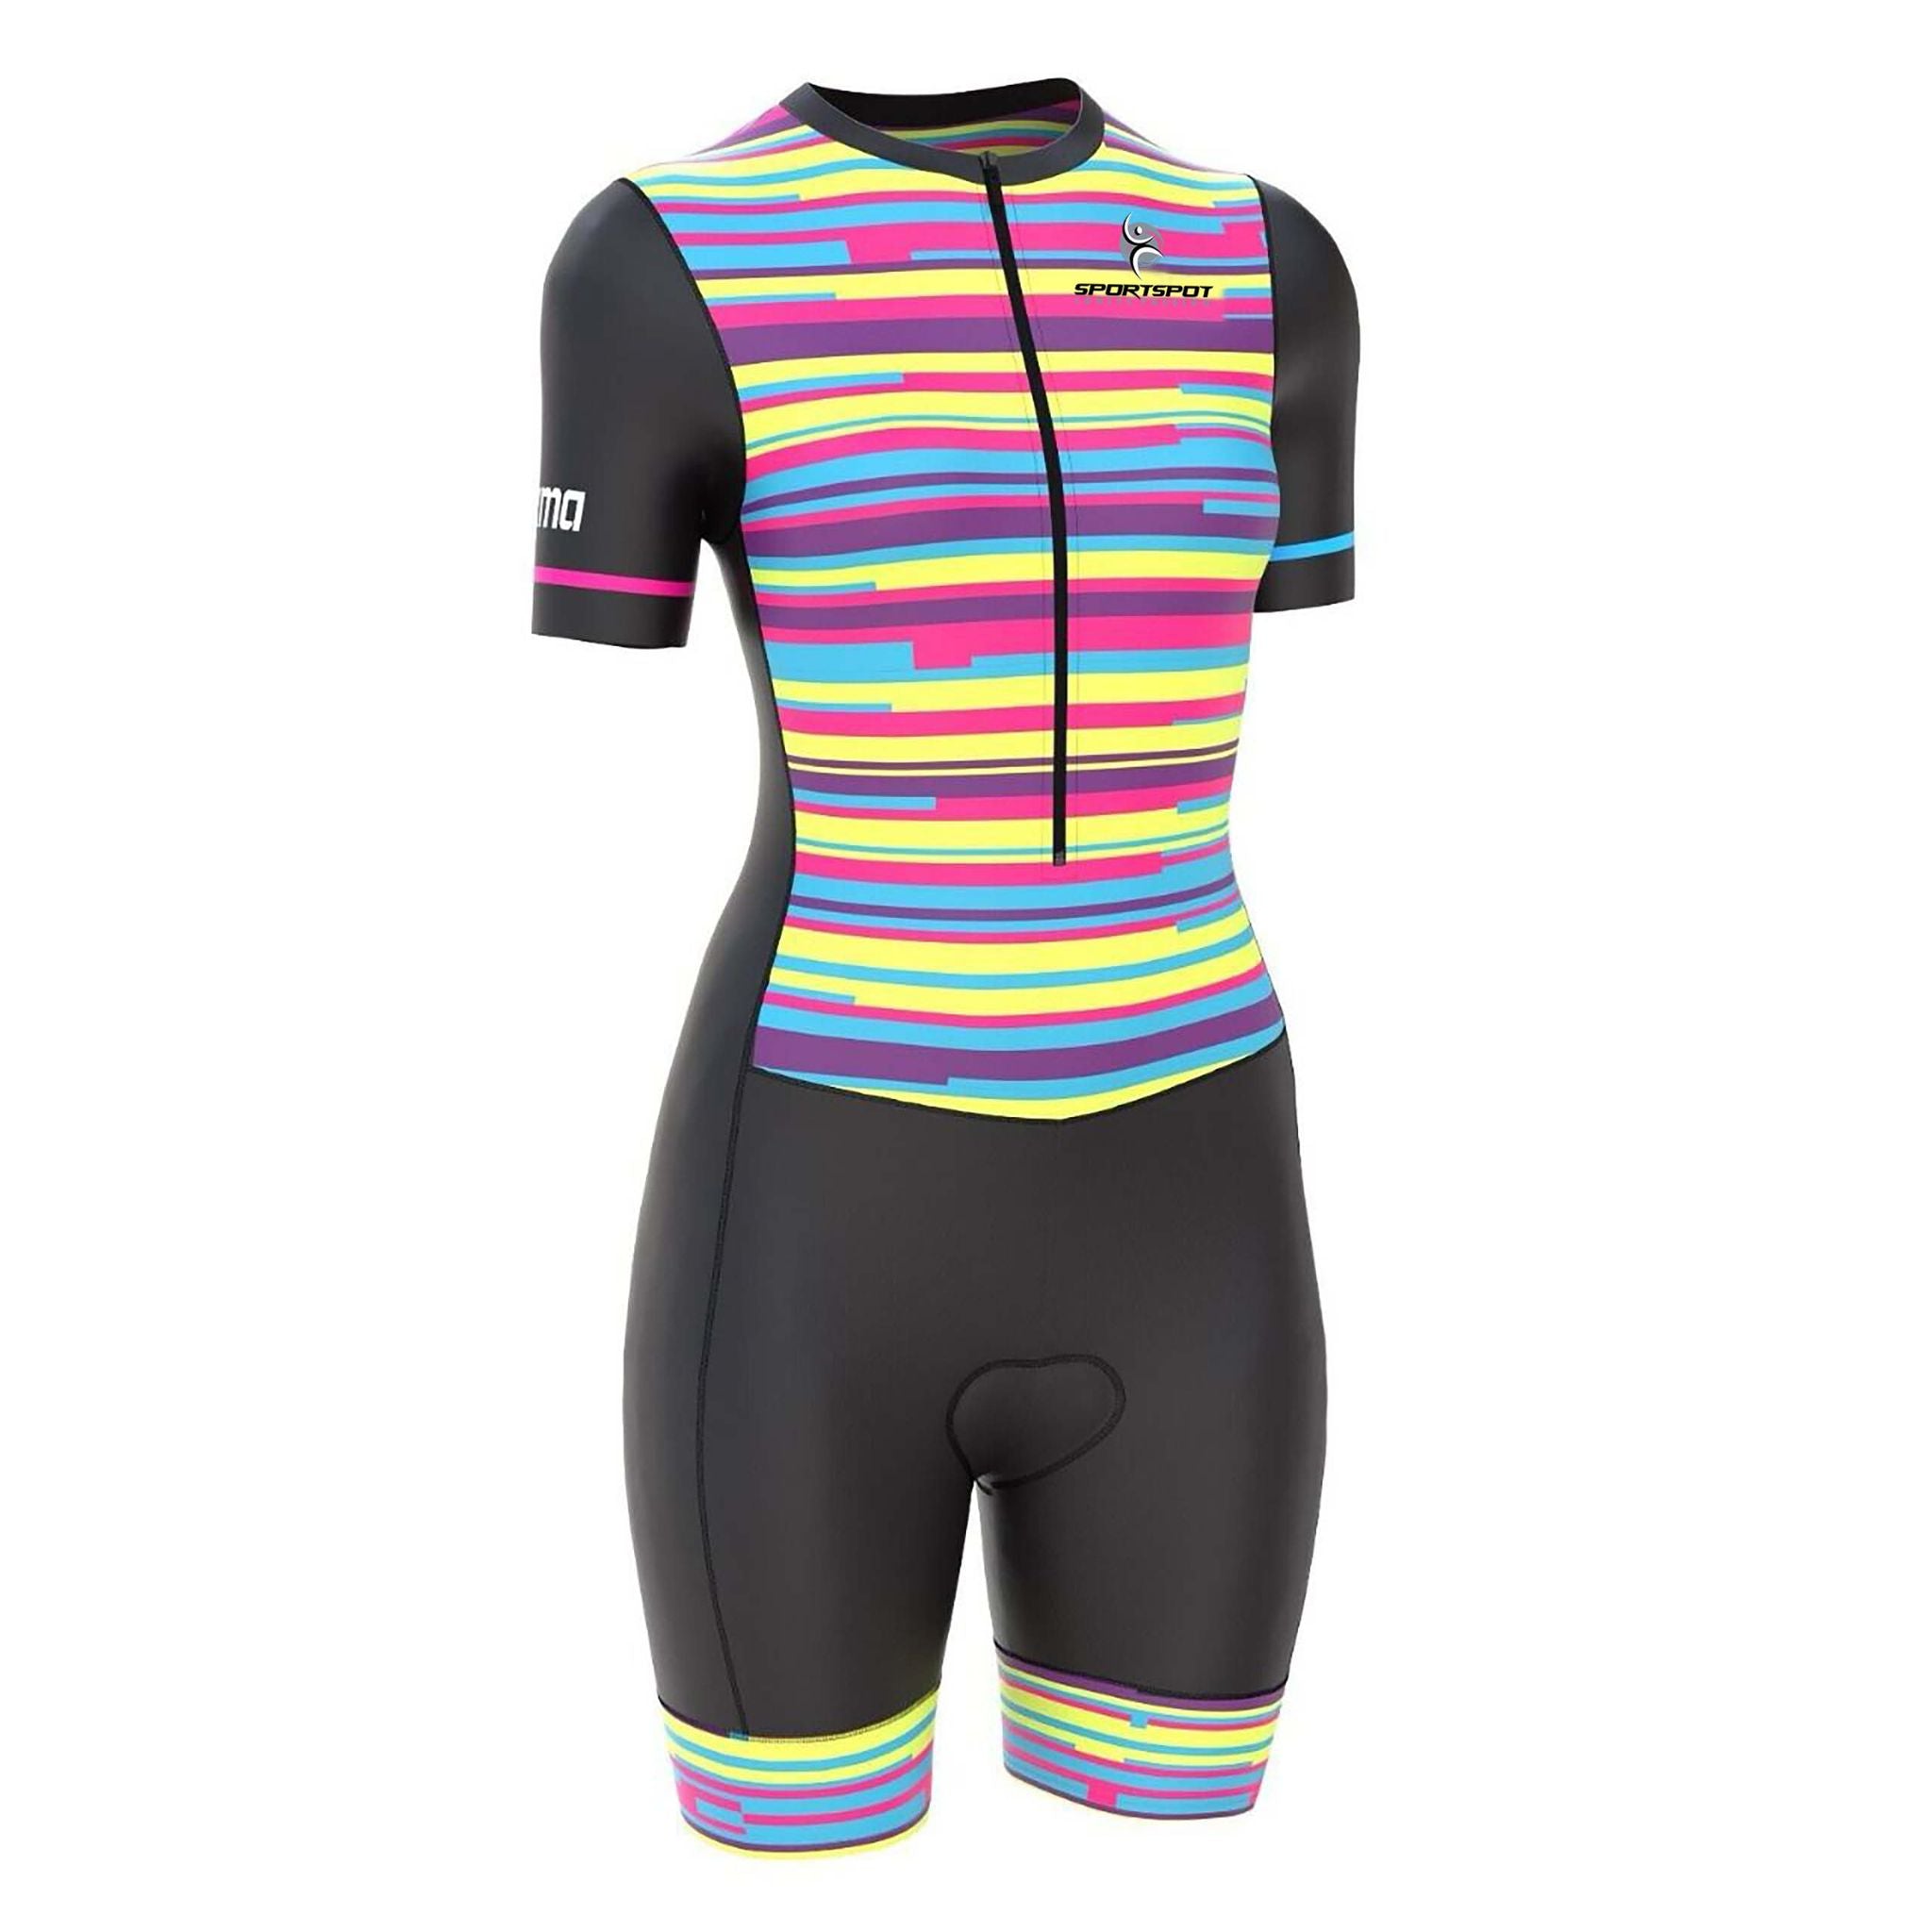 Women's Triathlon Compression Skinsuit for Cycling, Running, and Swimming with Gel Padding